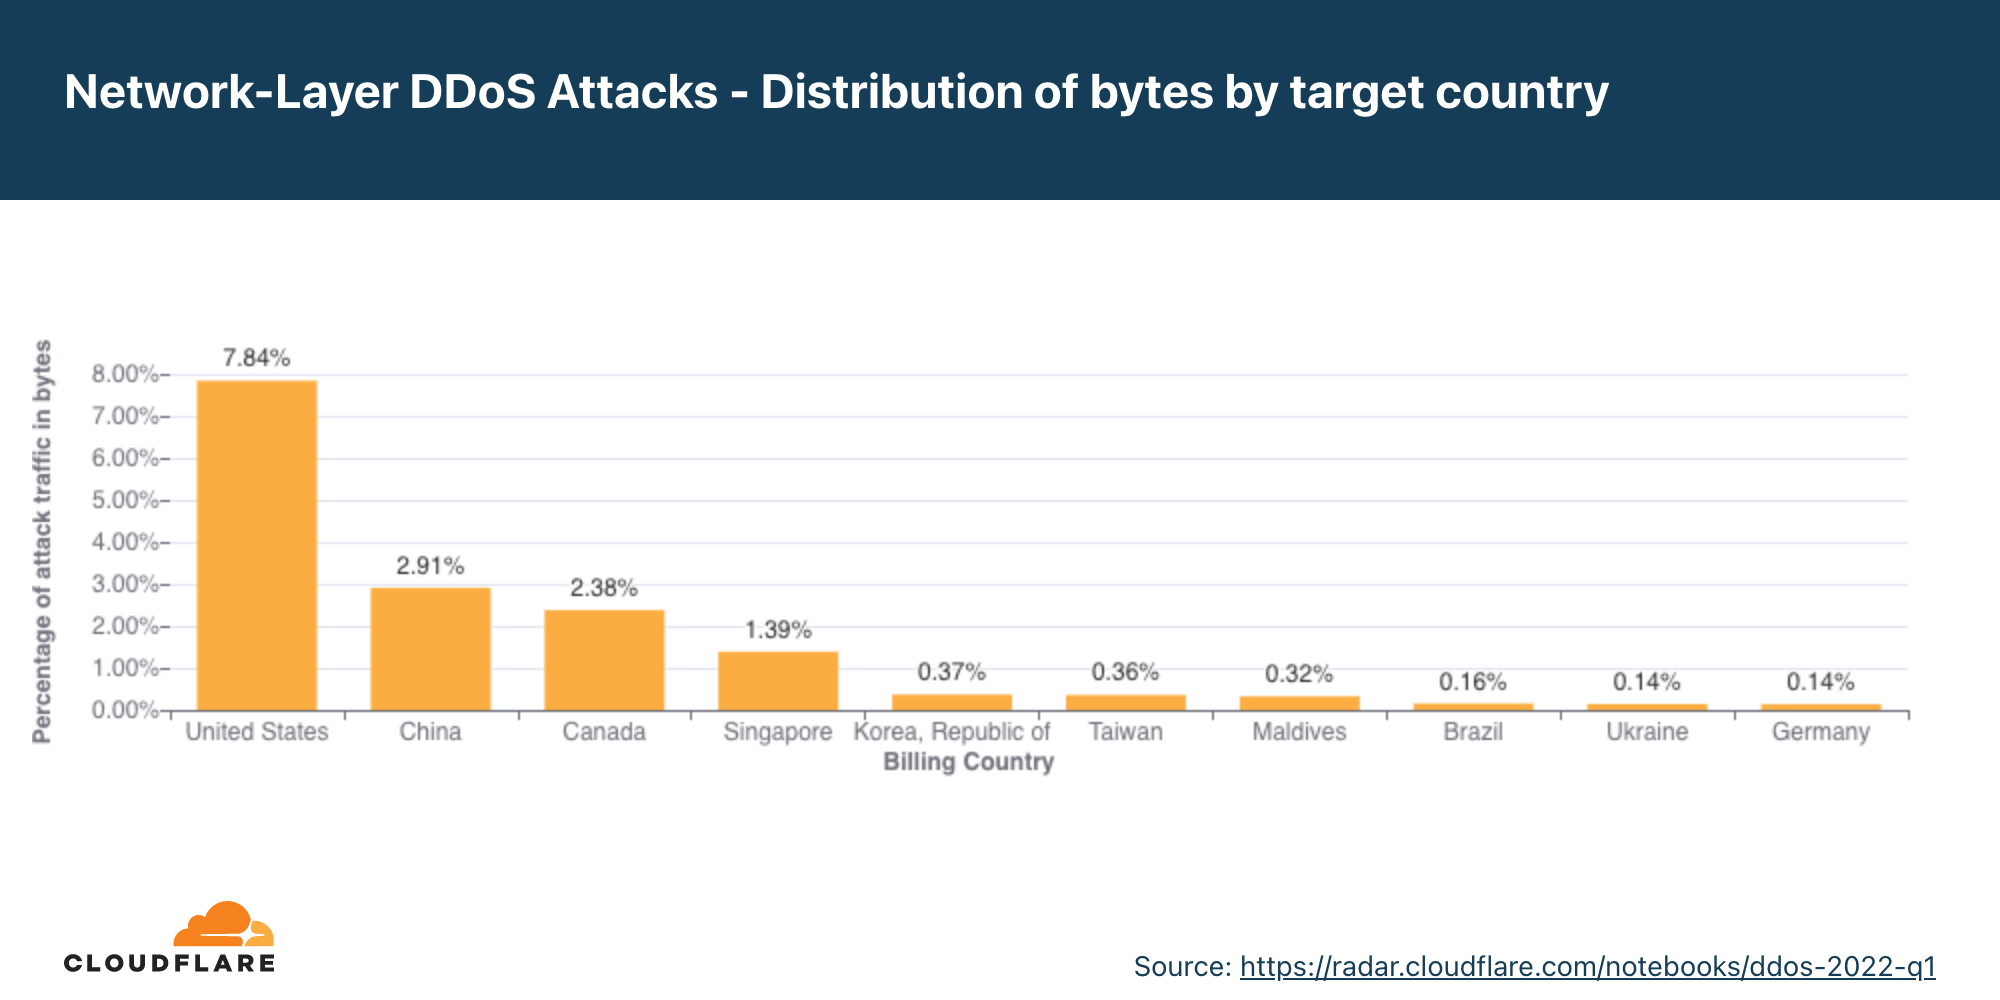 Graph of the distribution of network-layer DDoS attack bytes by target country